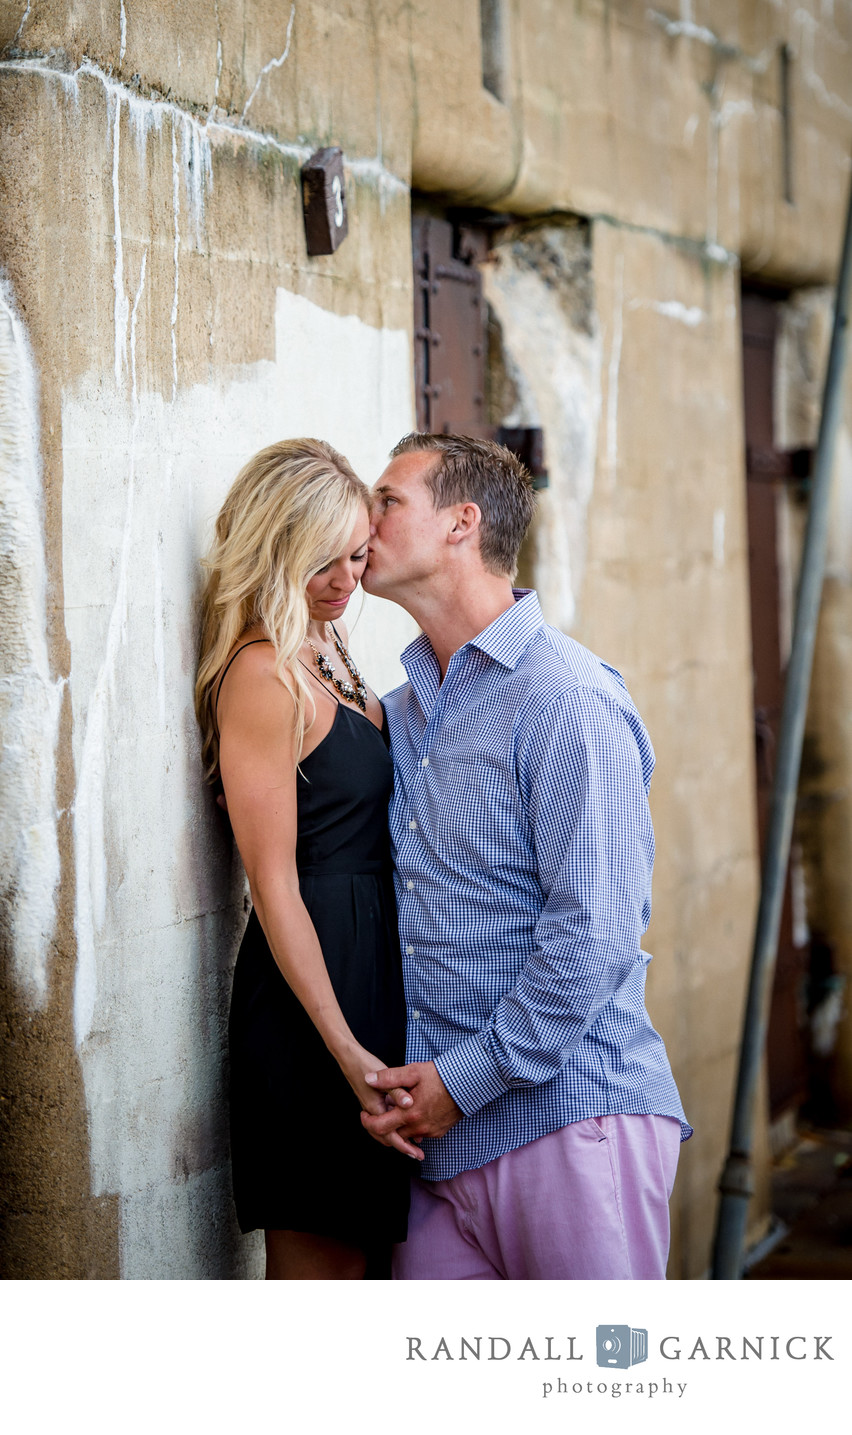 Romantic engagement photos in New England